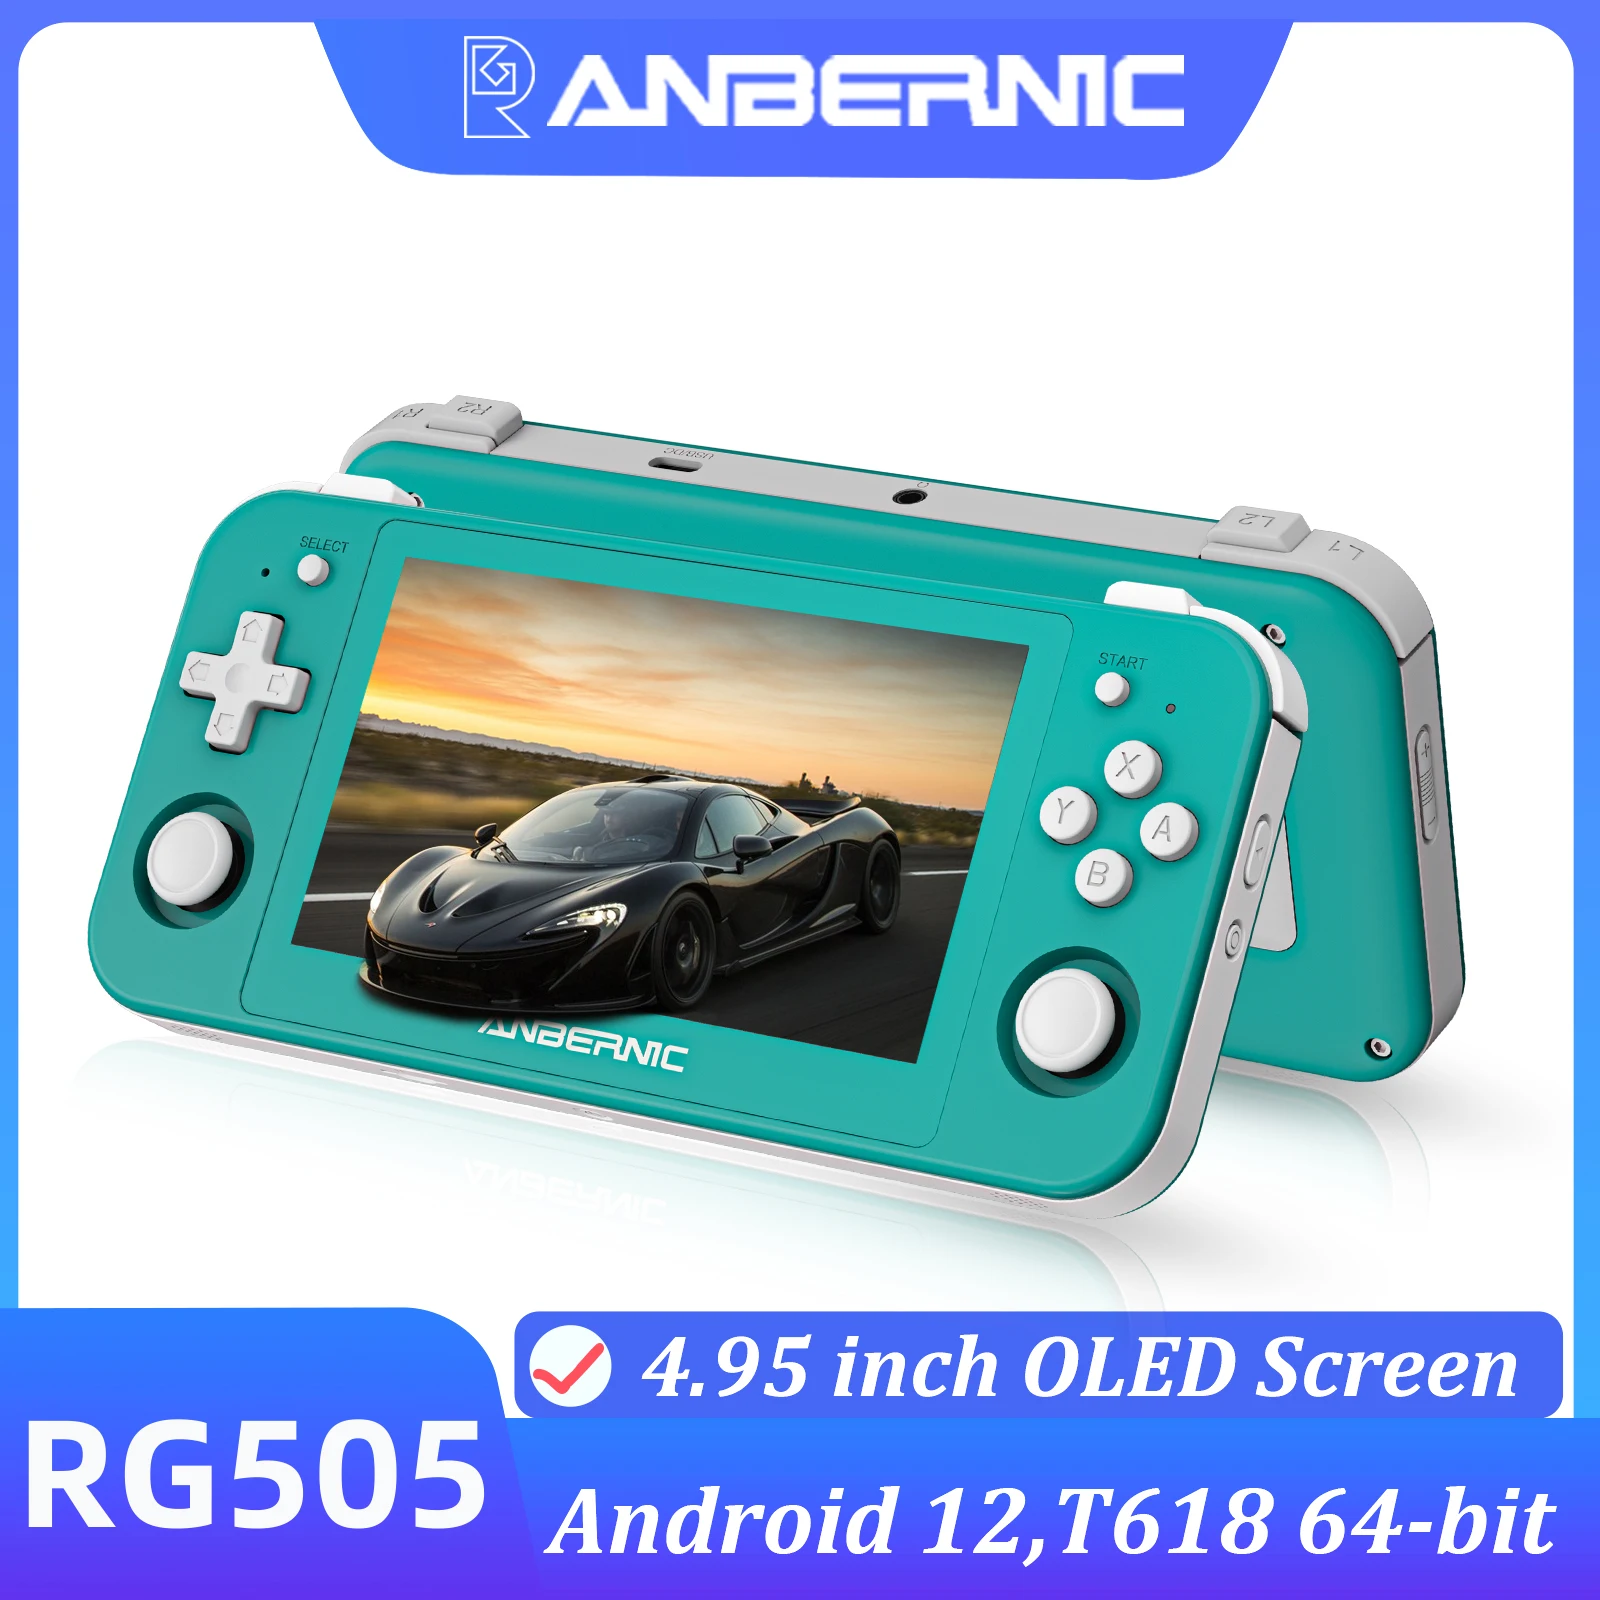 

ANBERNIC RG505 Handheld Game Console 4.95” OLED Touch Screen Android 12 Unisoc Tiger T618 64-bit With Hall Joyctick OTA Update